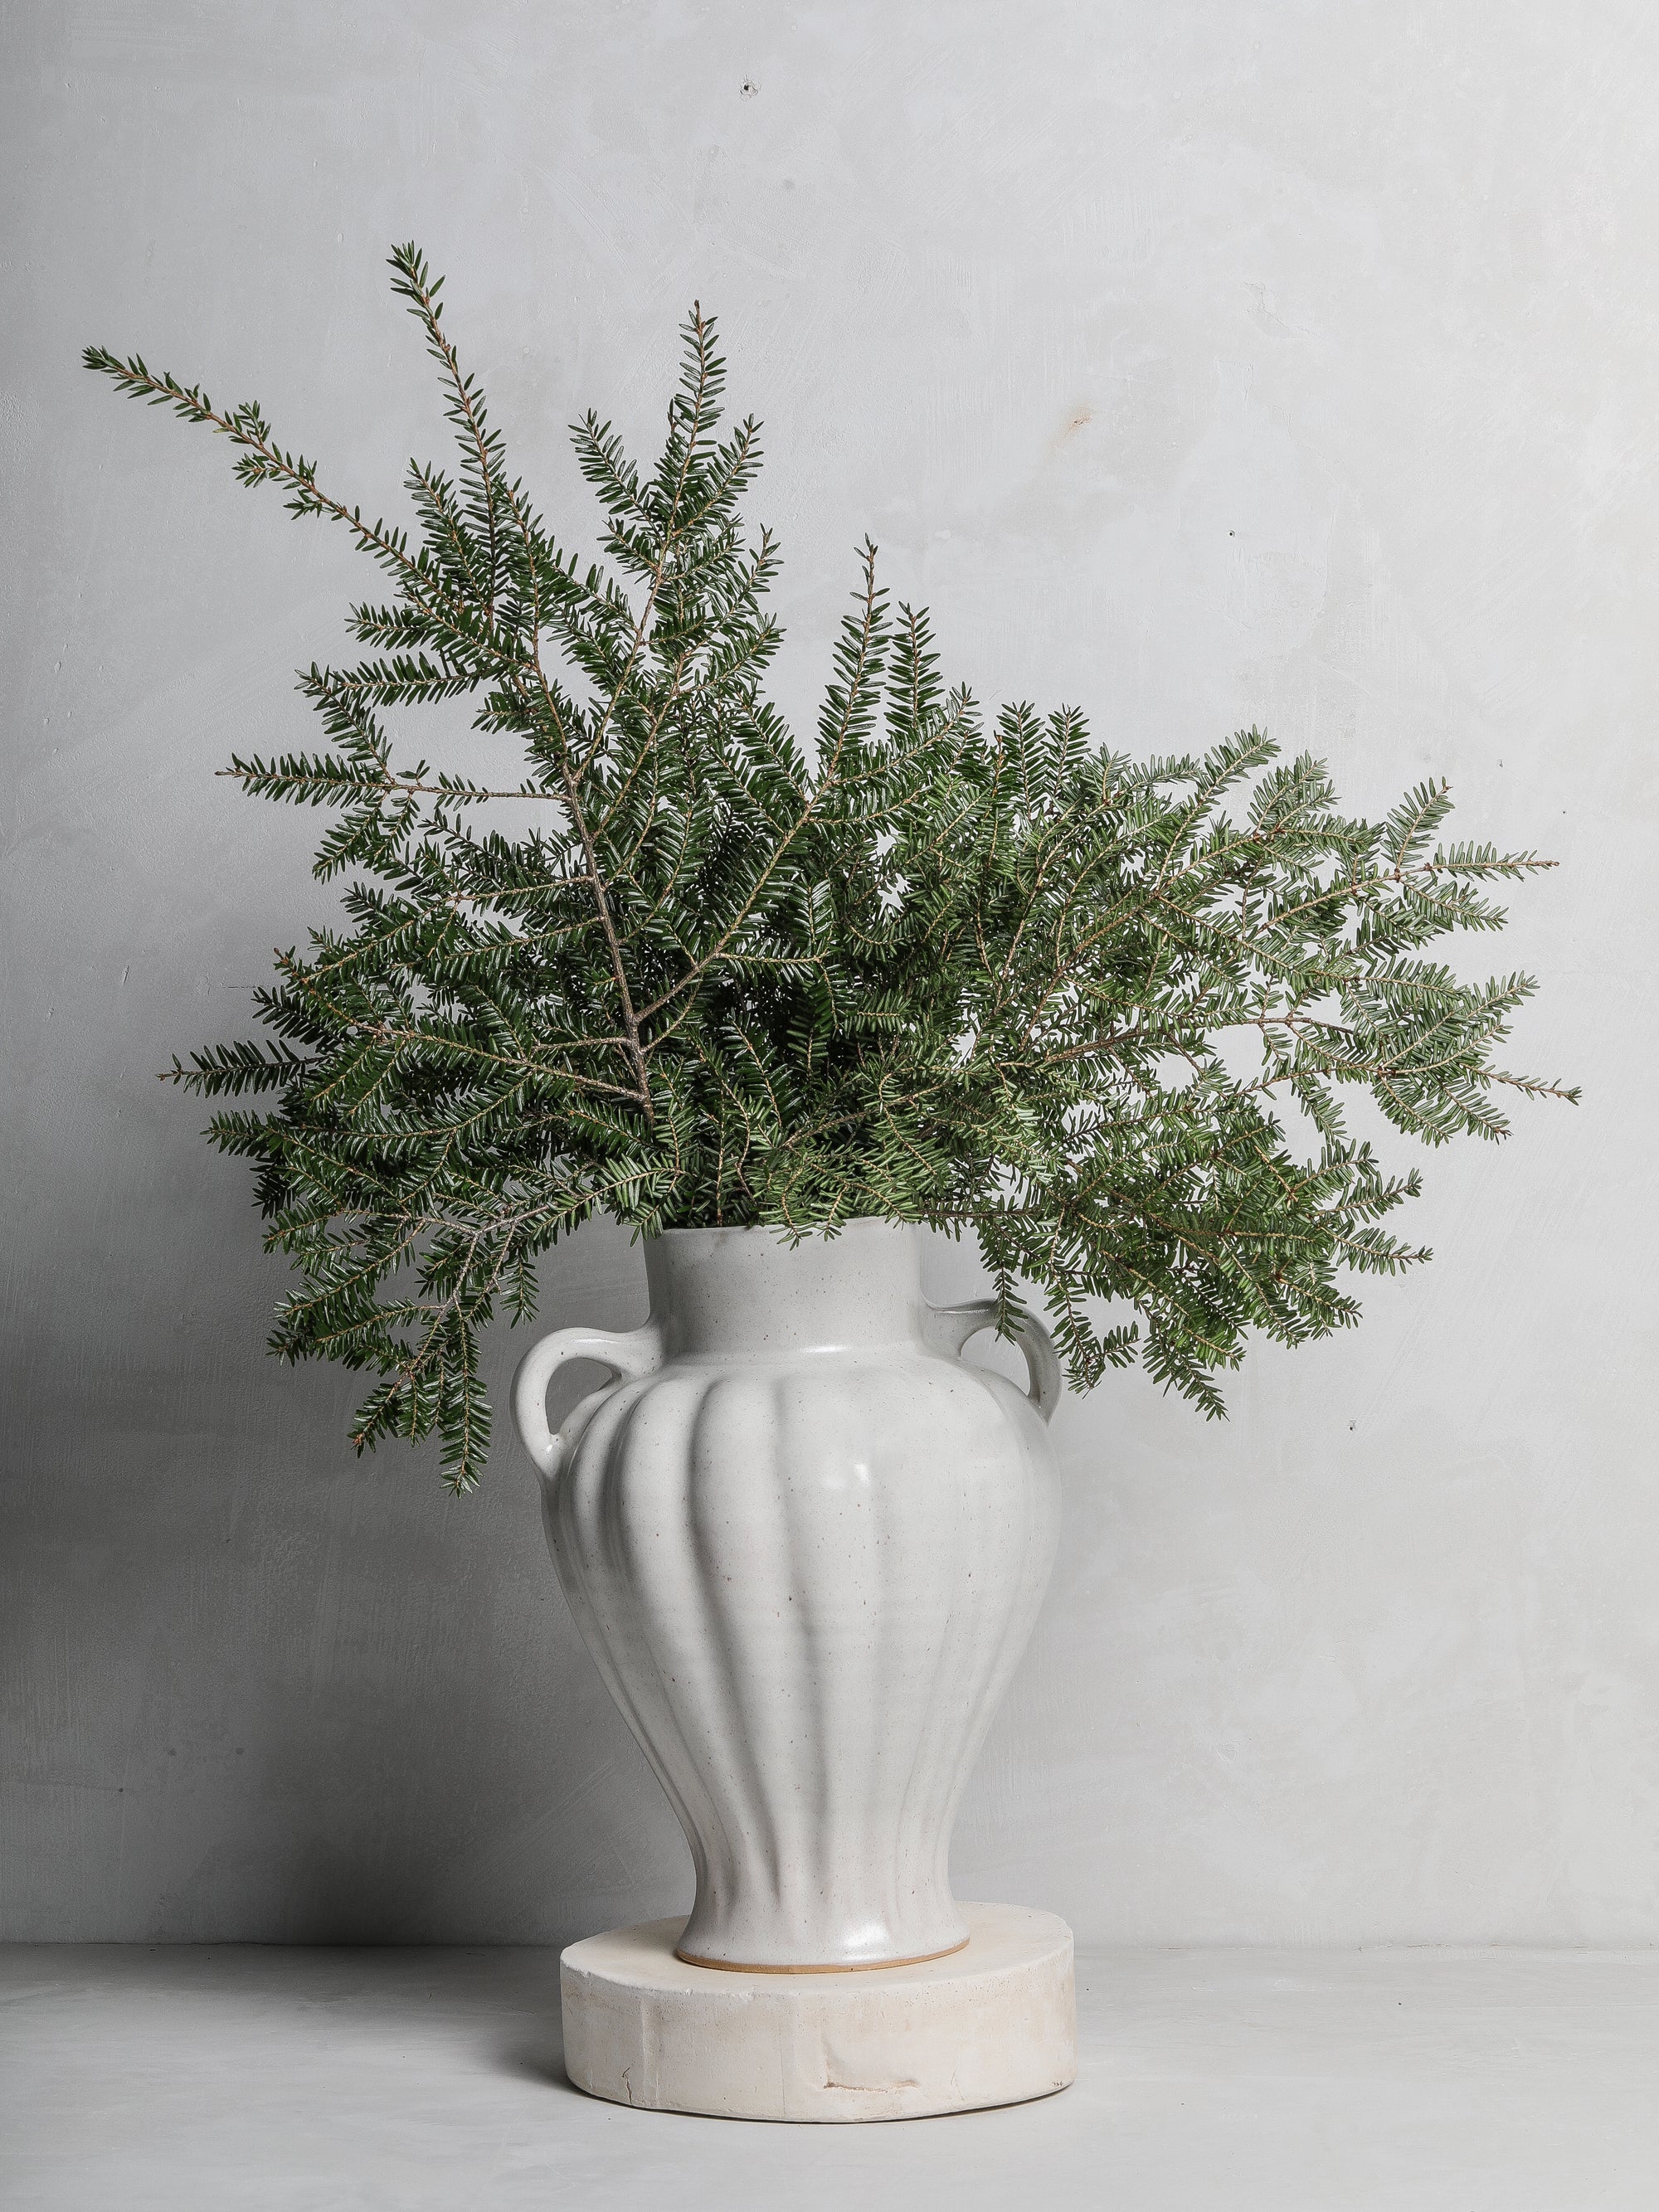 French Scalloped Vase I in Lunaria